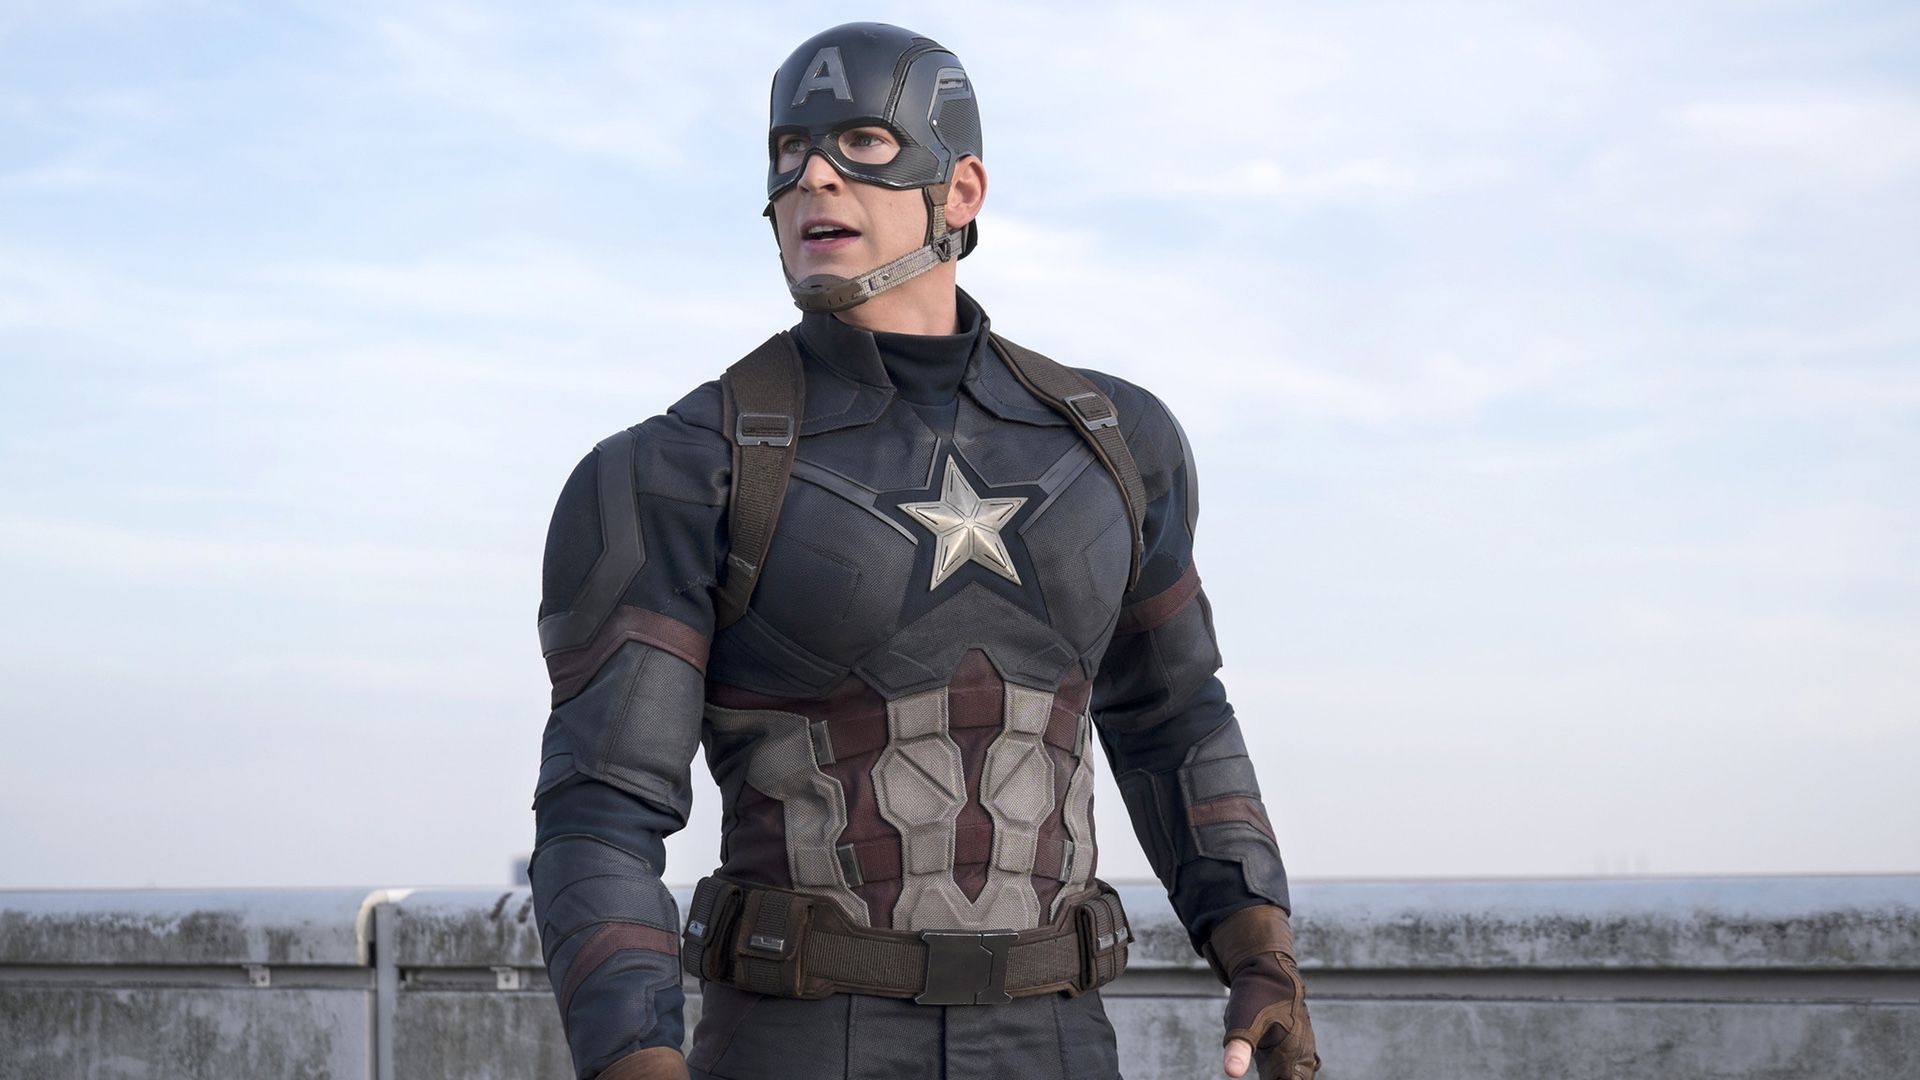 Captain America stands in front of a waist-high wall, looking off into the distance